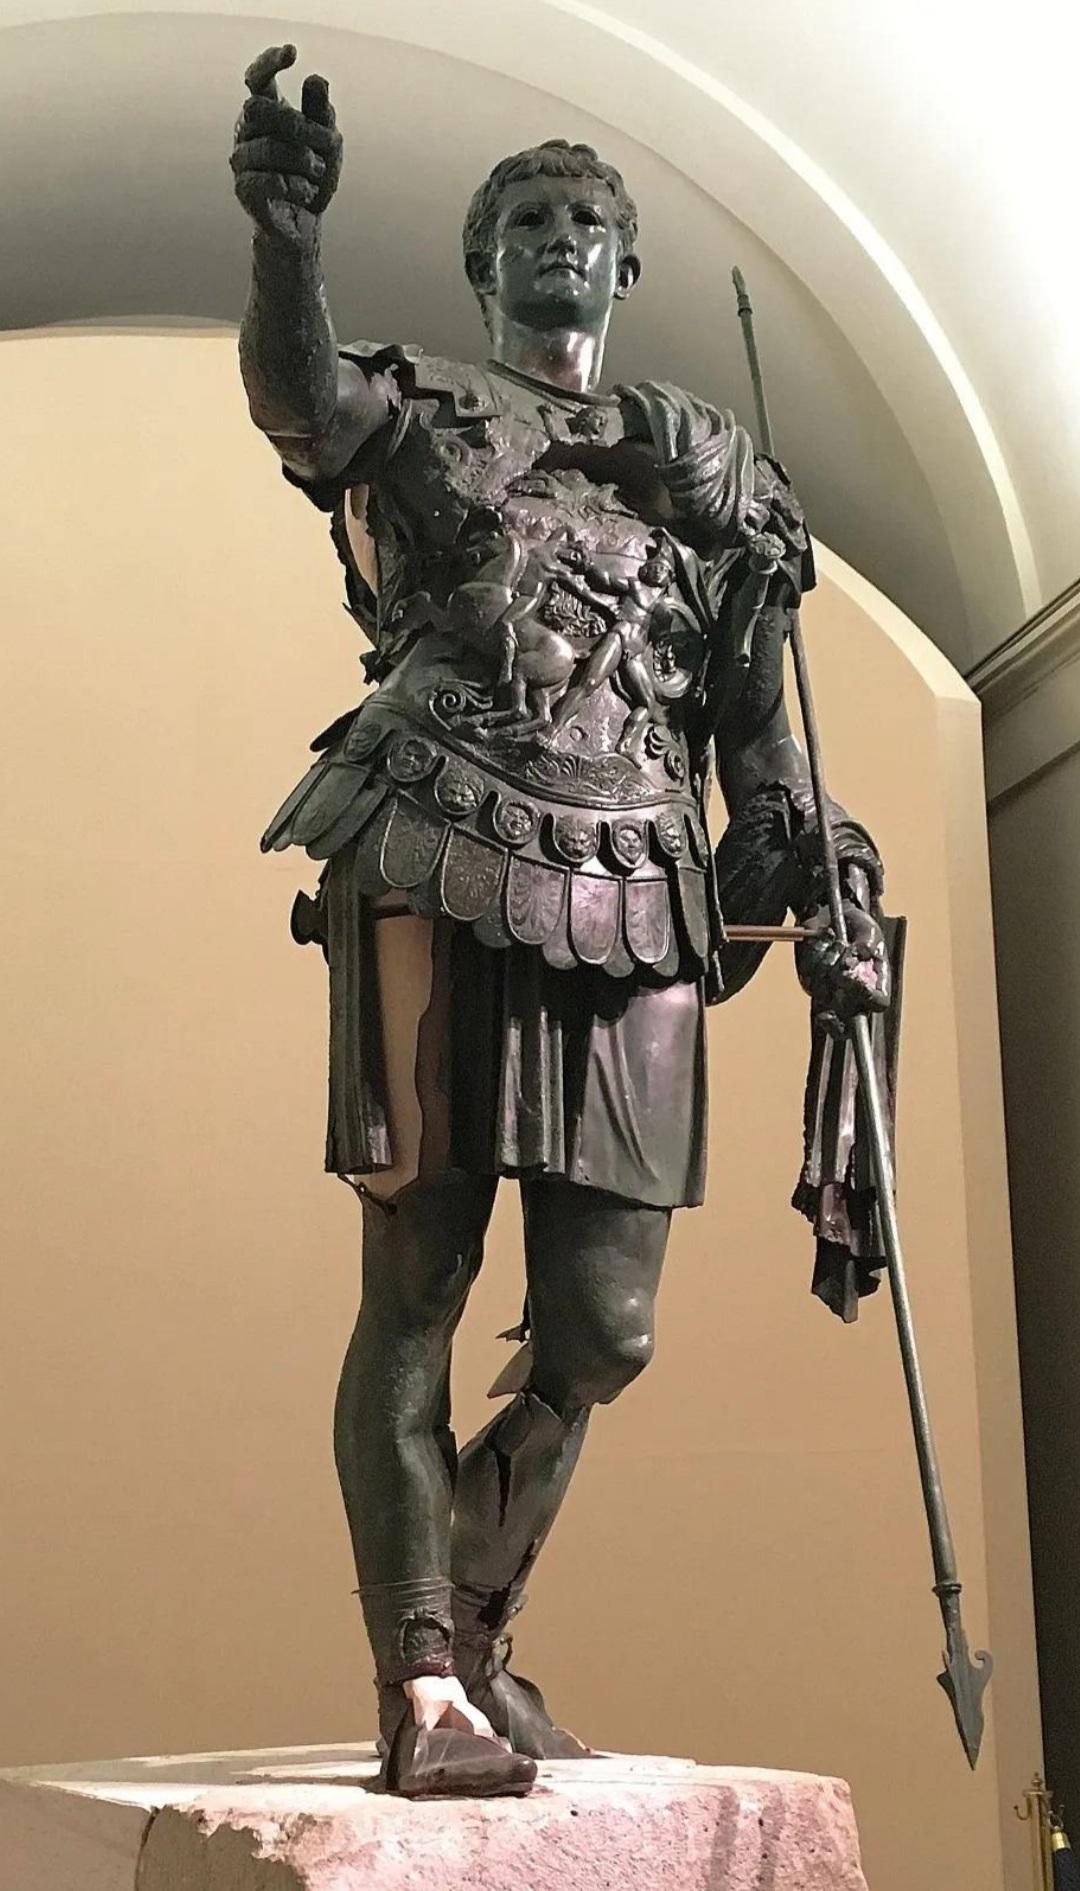 A larger-than-life bronze statue of the Roman general Germanicus (15 BCE-19 CE), unearthed in 1963 in the town of Amelia in Italy. Now housed at the Museo civico di Amelia.jpeg